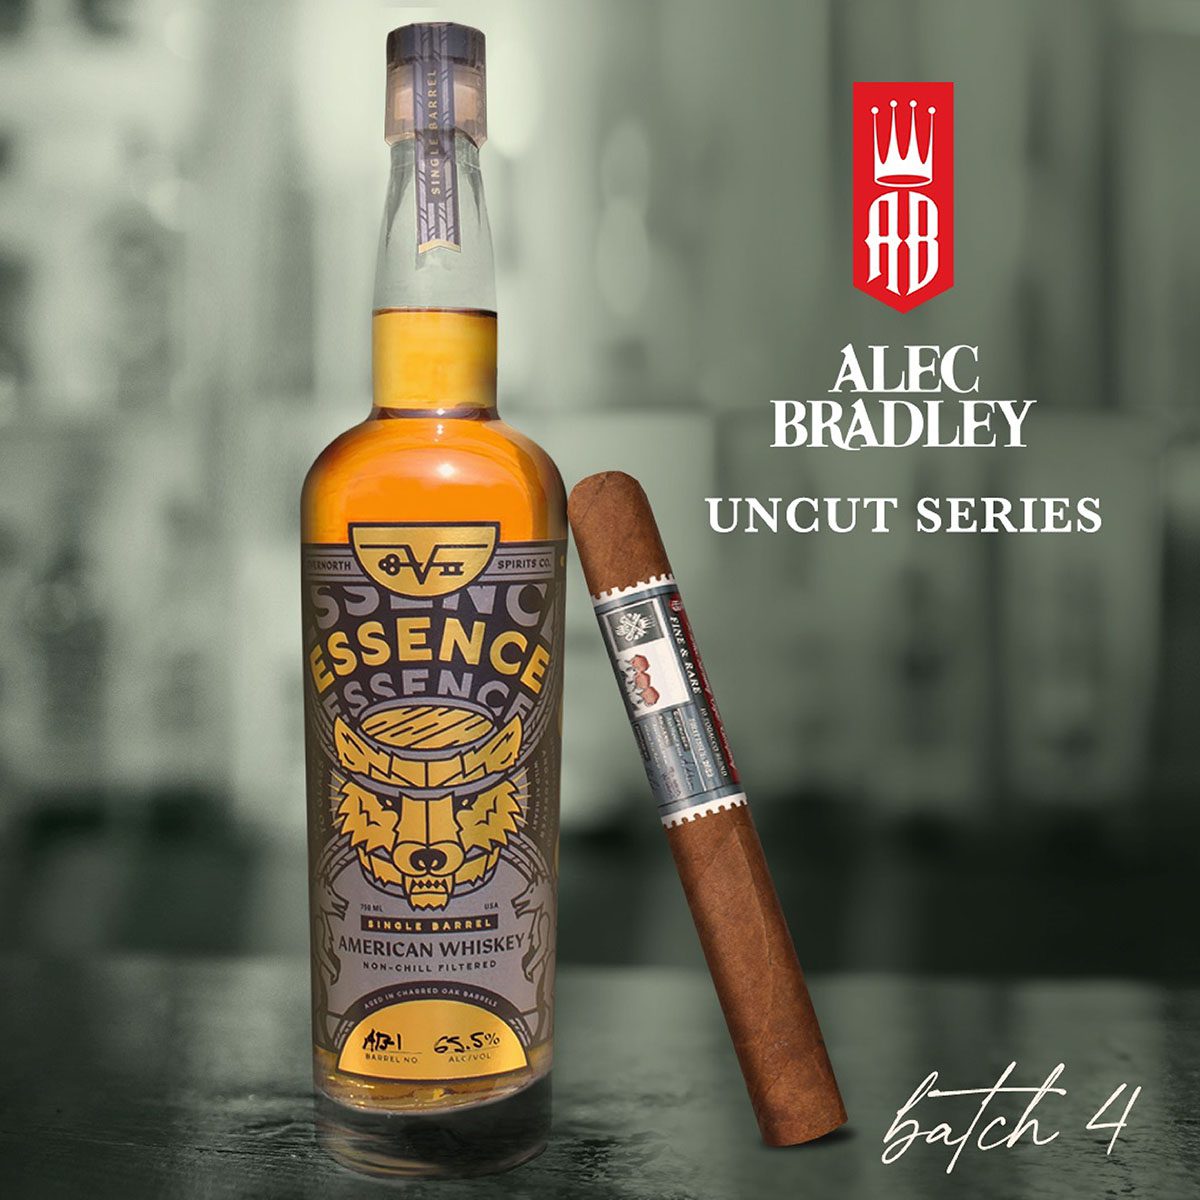 alec-bradley-uncut-batch-4-features-single-barrel-whiskey-from-evernorth-spirits